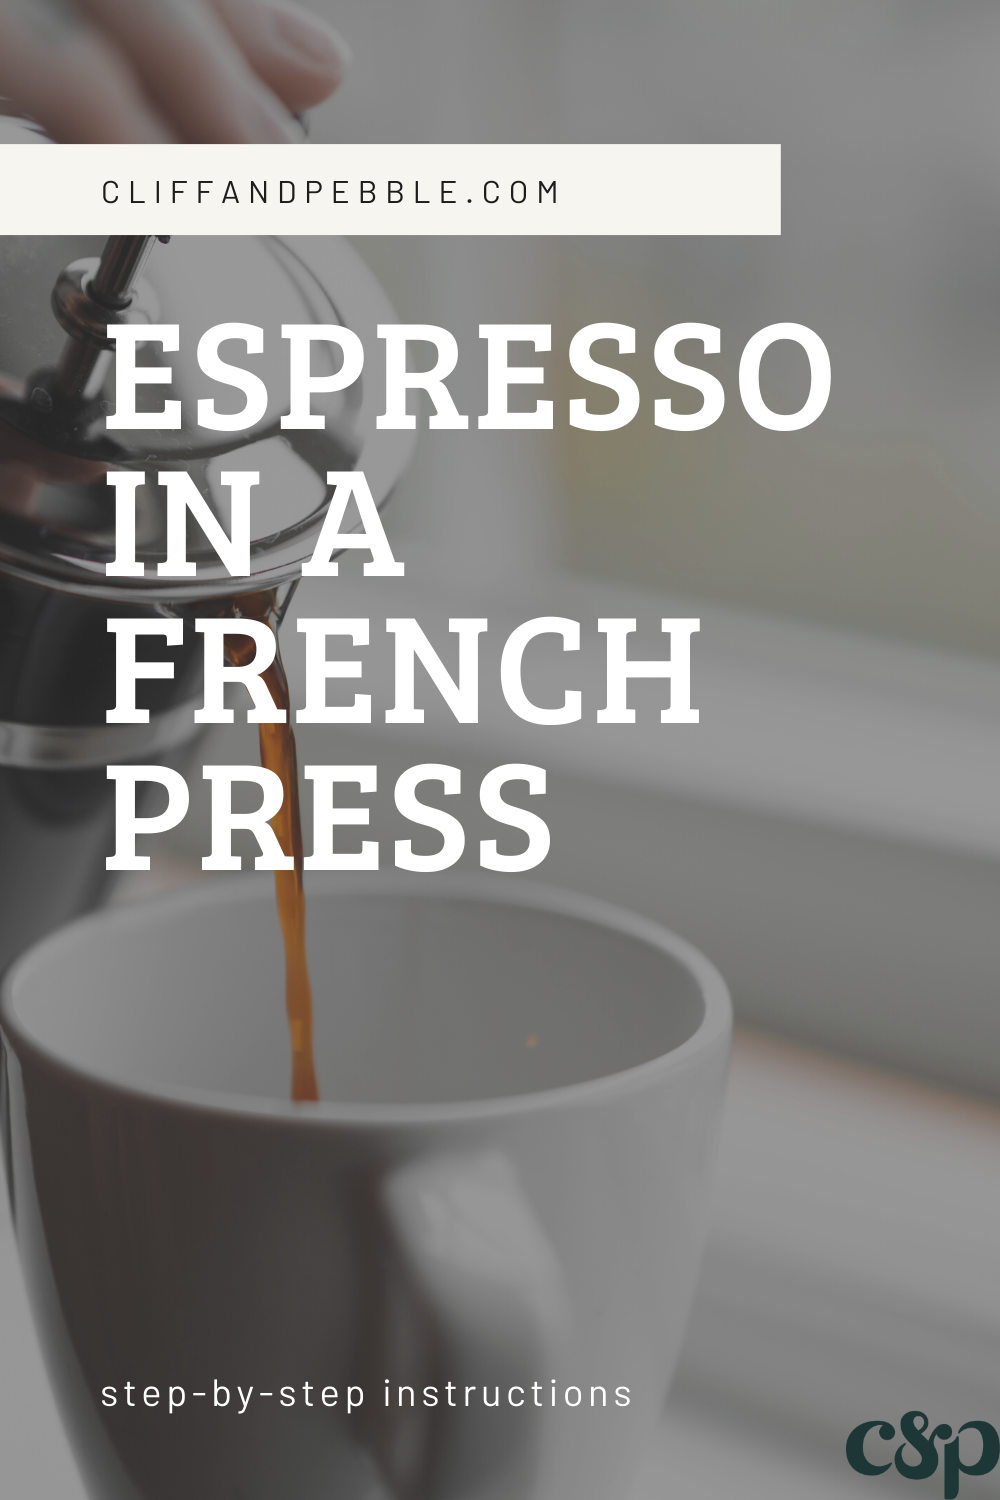 https://cdn.shopify.com/s/files/1/1365/5333/files/how-to-make-espresso-in-a-french-press.png?v=1591658490